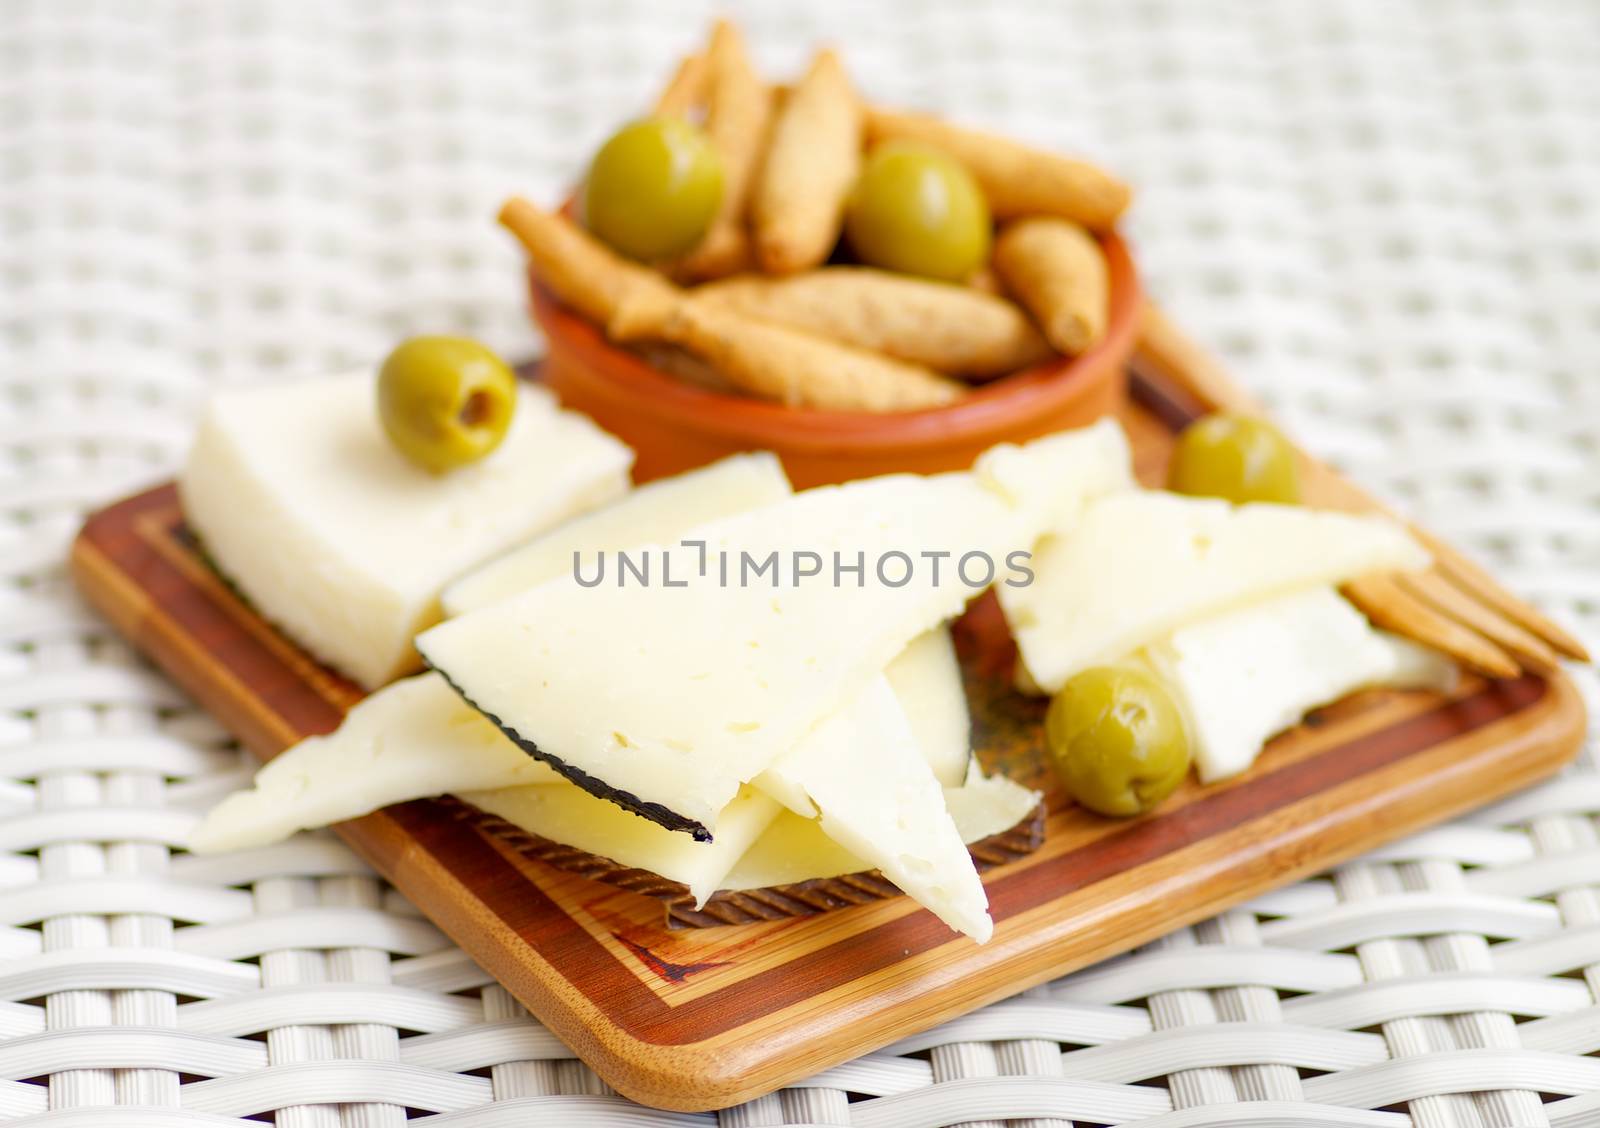 Various Goat Cheeses with Bread Sticks and Green Olives on Wooden Plate closeup on Wicker background. Focus on Foreground